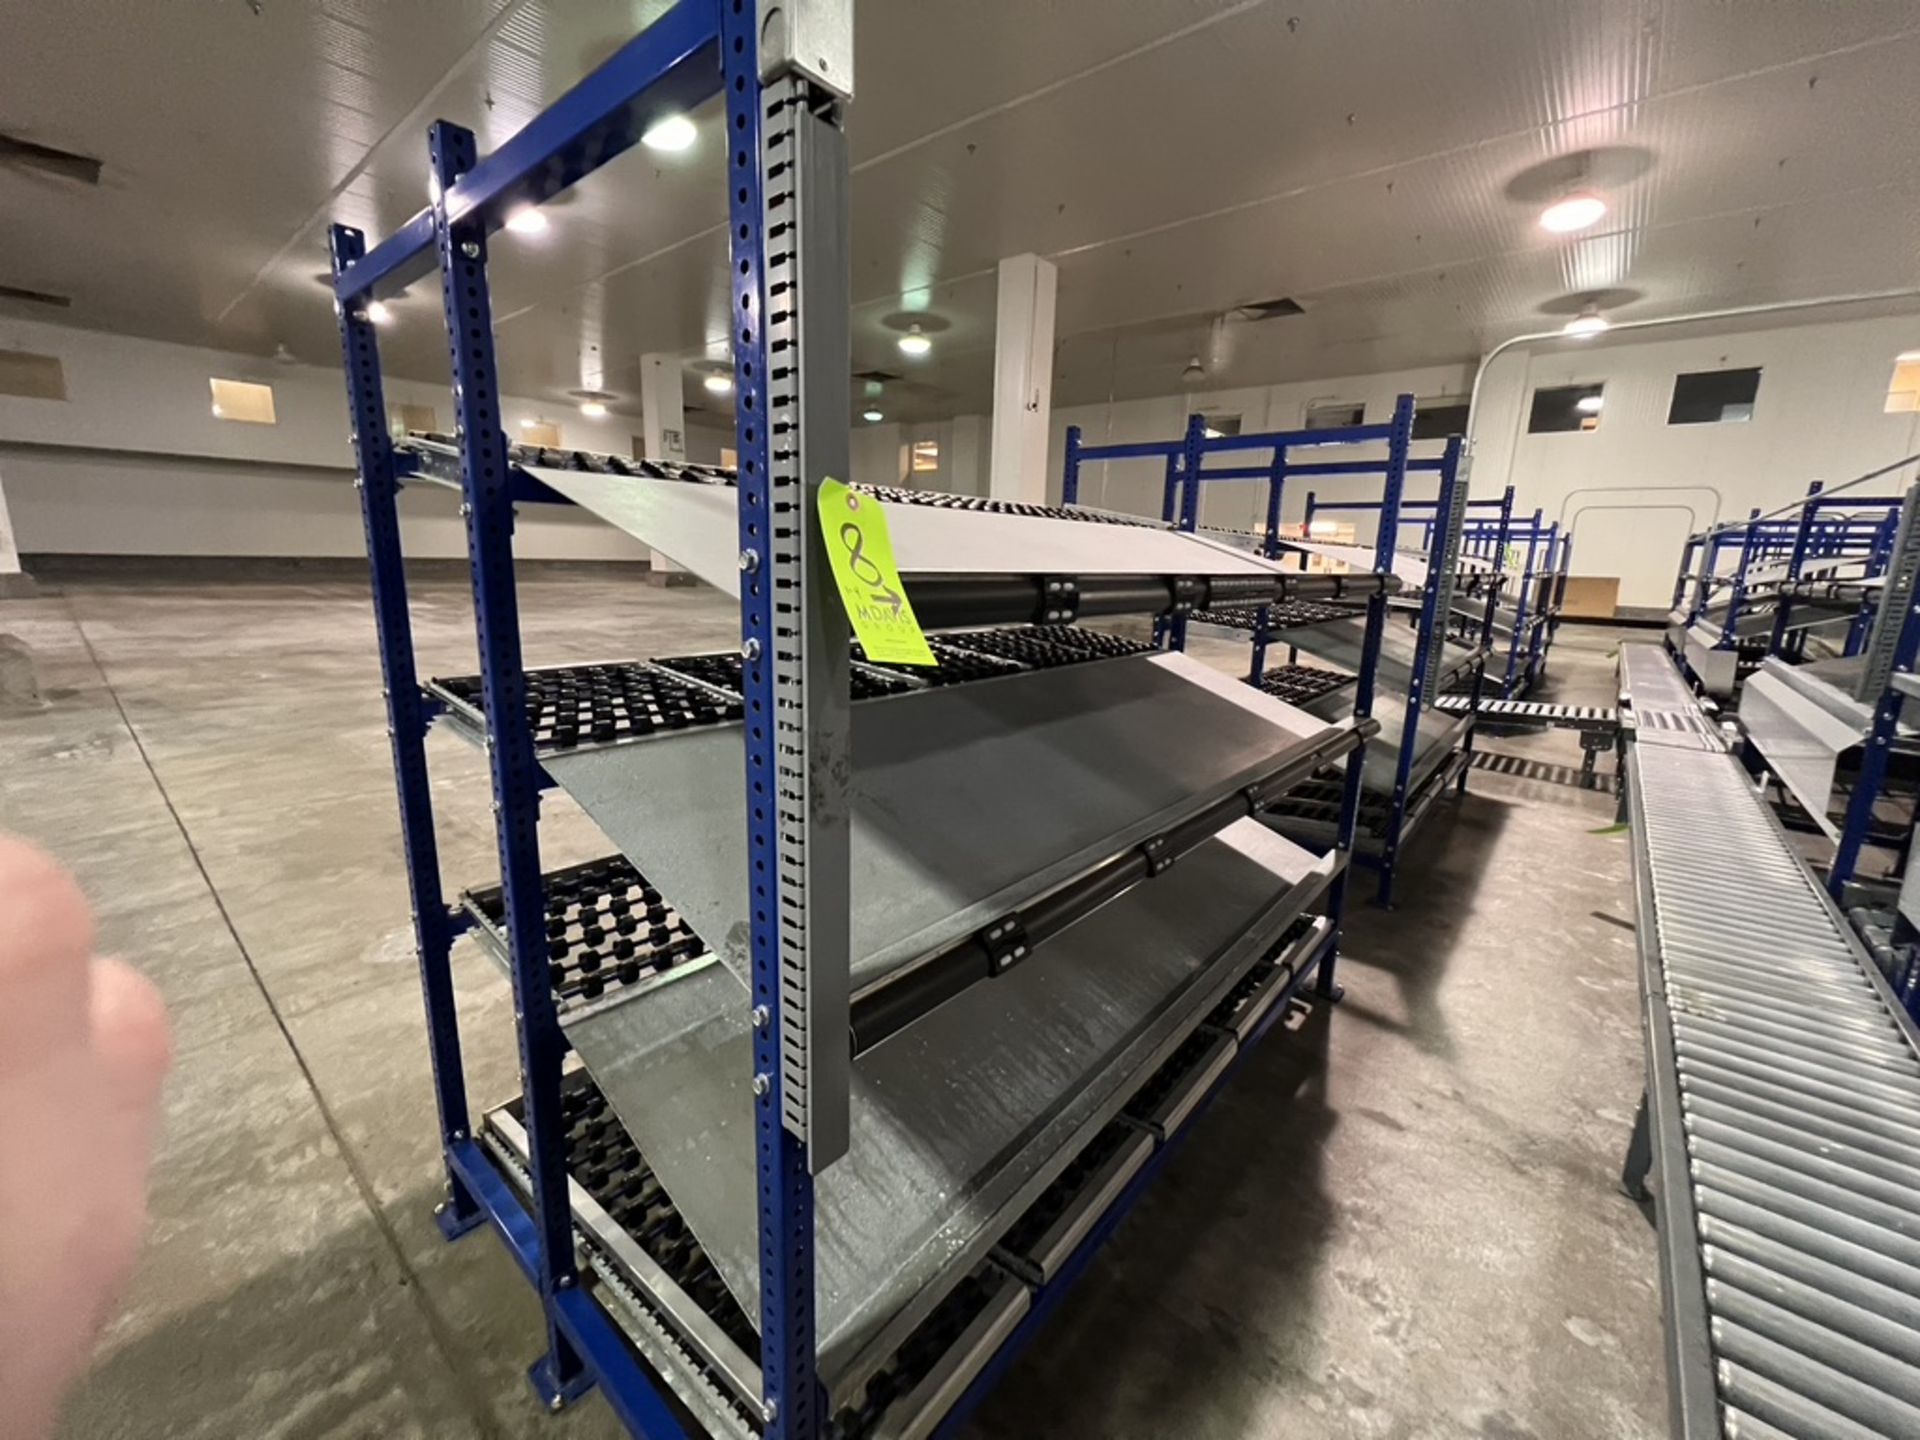 (4) UNEX SPAN TRACK PRODUCT PACK-OFF RACKS, WITH ROLLER CONVEYOR (SUBJECT TO BULK BID IN LOT 11A)